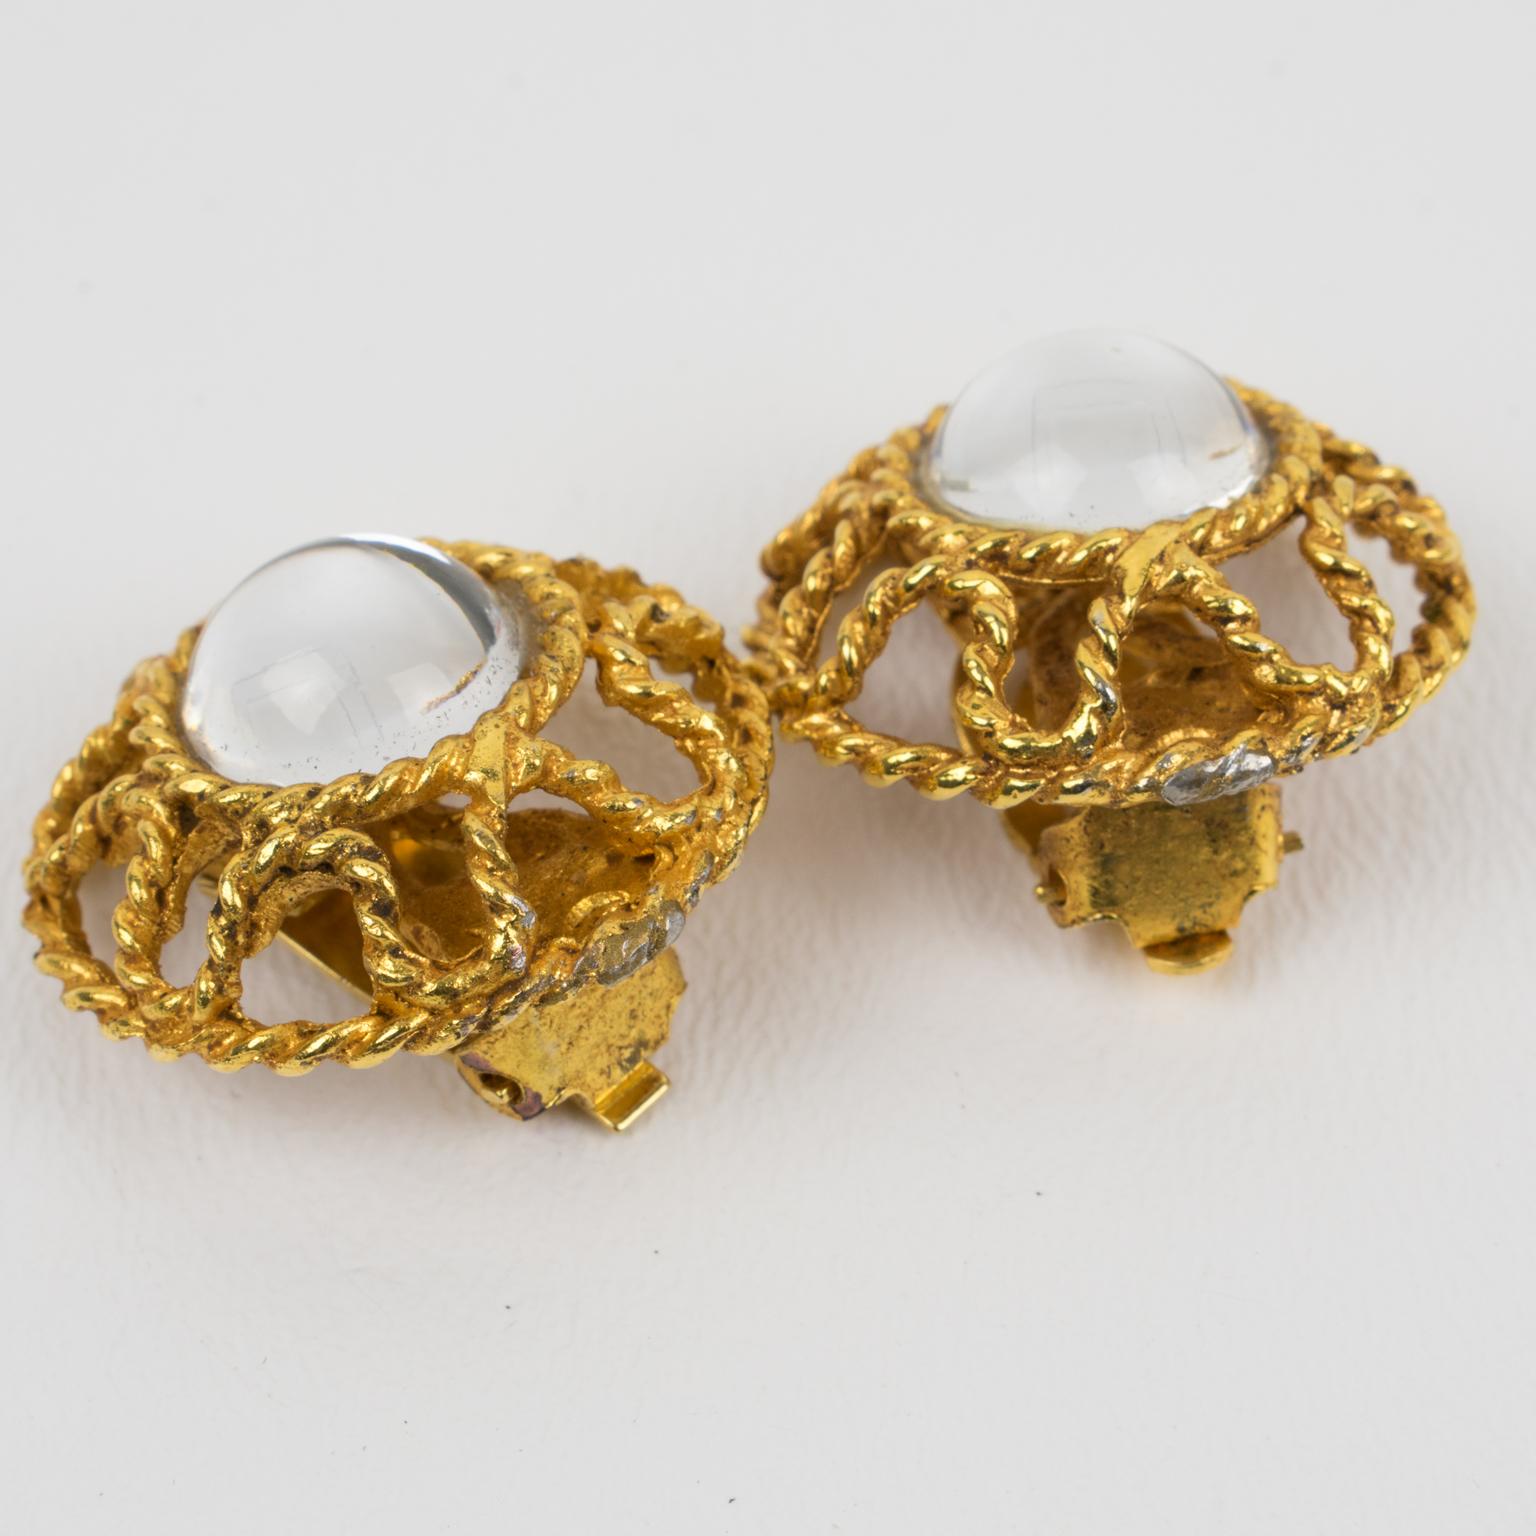  Alexis Lahellec Paris Clip Earrings Gilt Metal with Mirrored Glass Cabochons For Sale 1